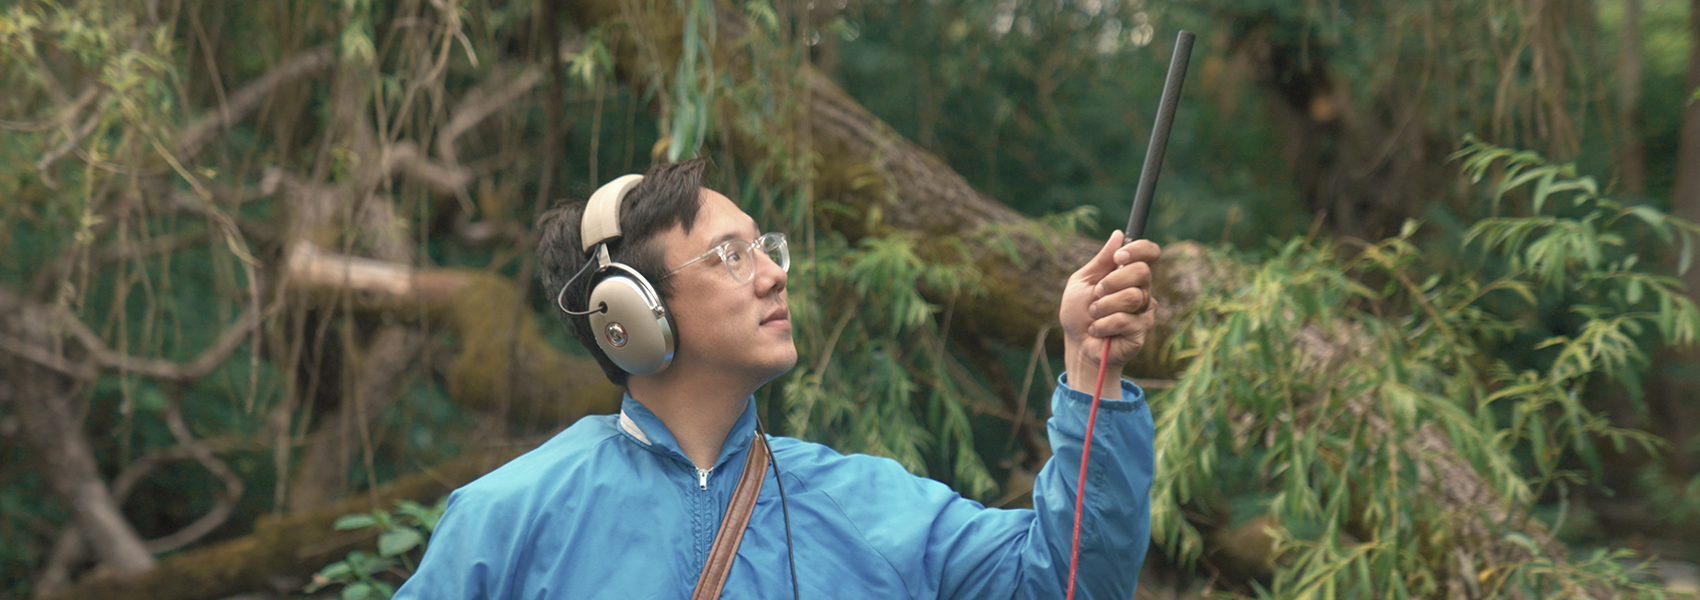 No-No Boy is pictured standing in the woods wearing headphones and holding a microphone.